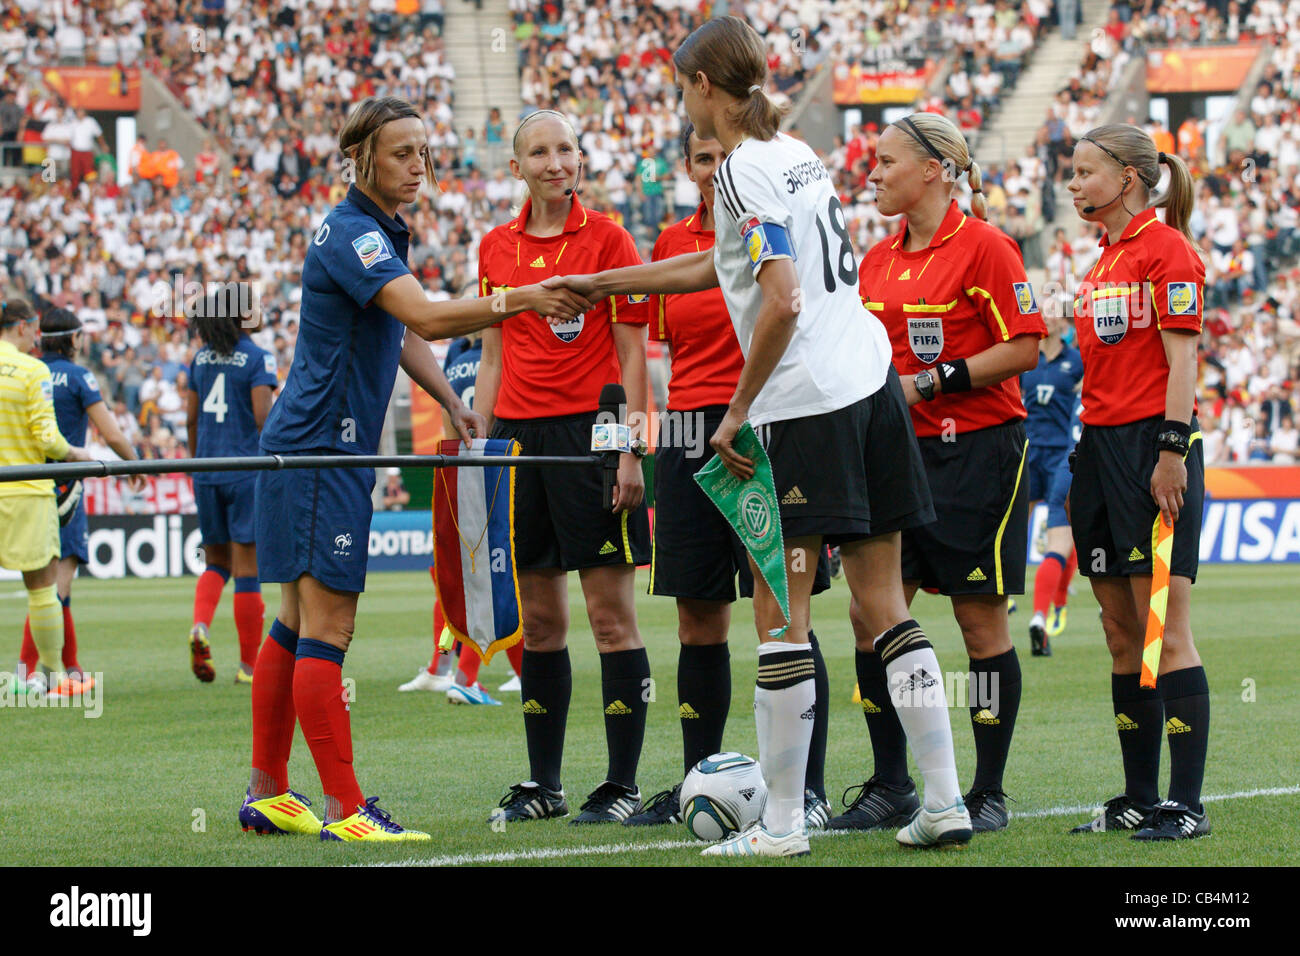 Team captains Sandrine Soubeyrand of France (L) and Kerstin Garefrekes of Germany (R) shake hands before a 2011 World Cup match. Stock Photo